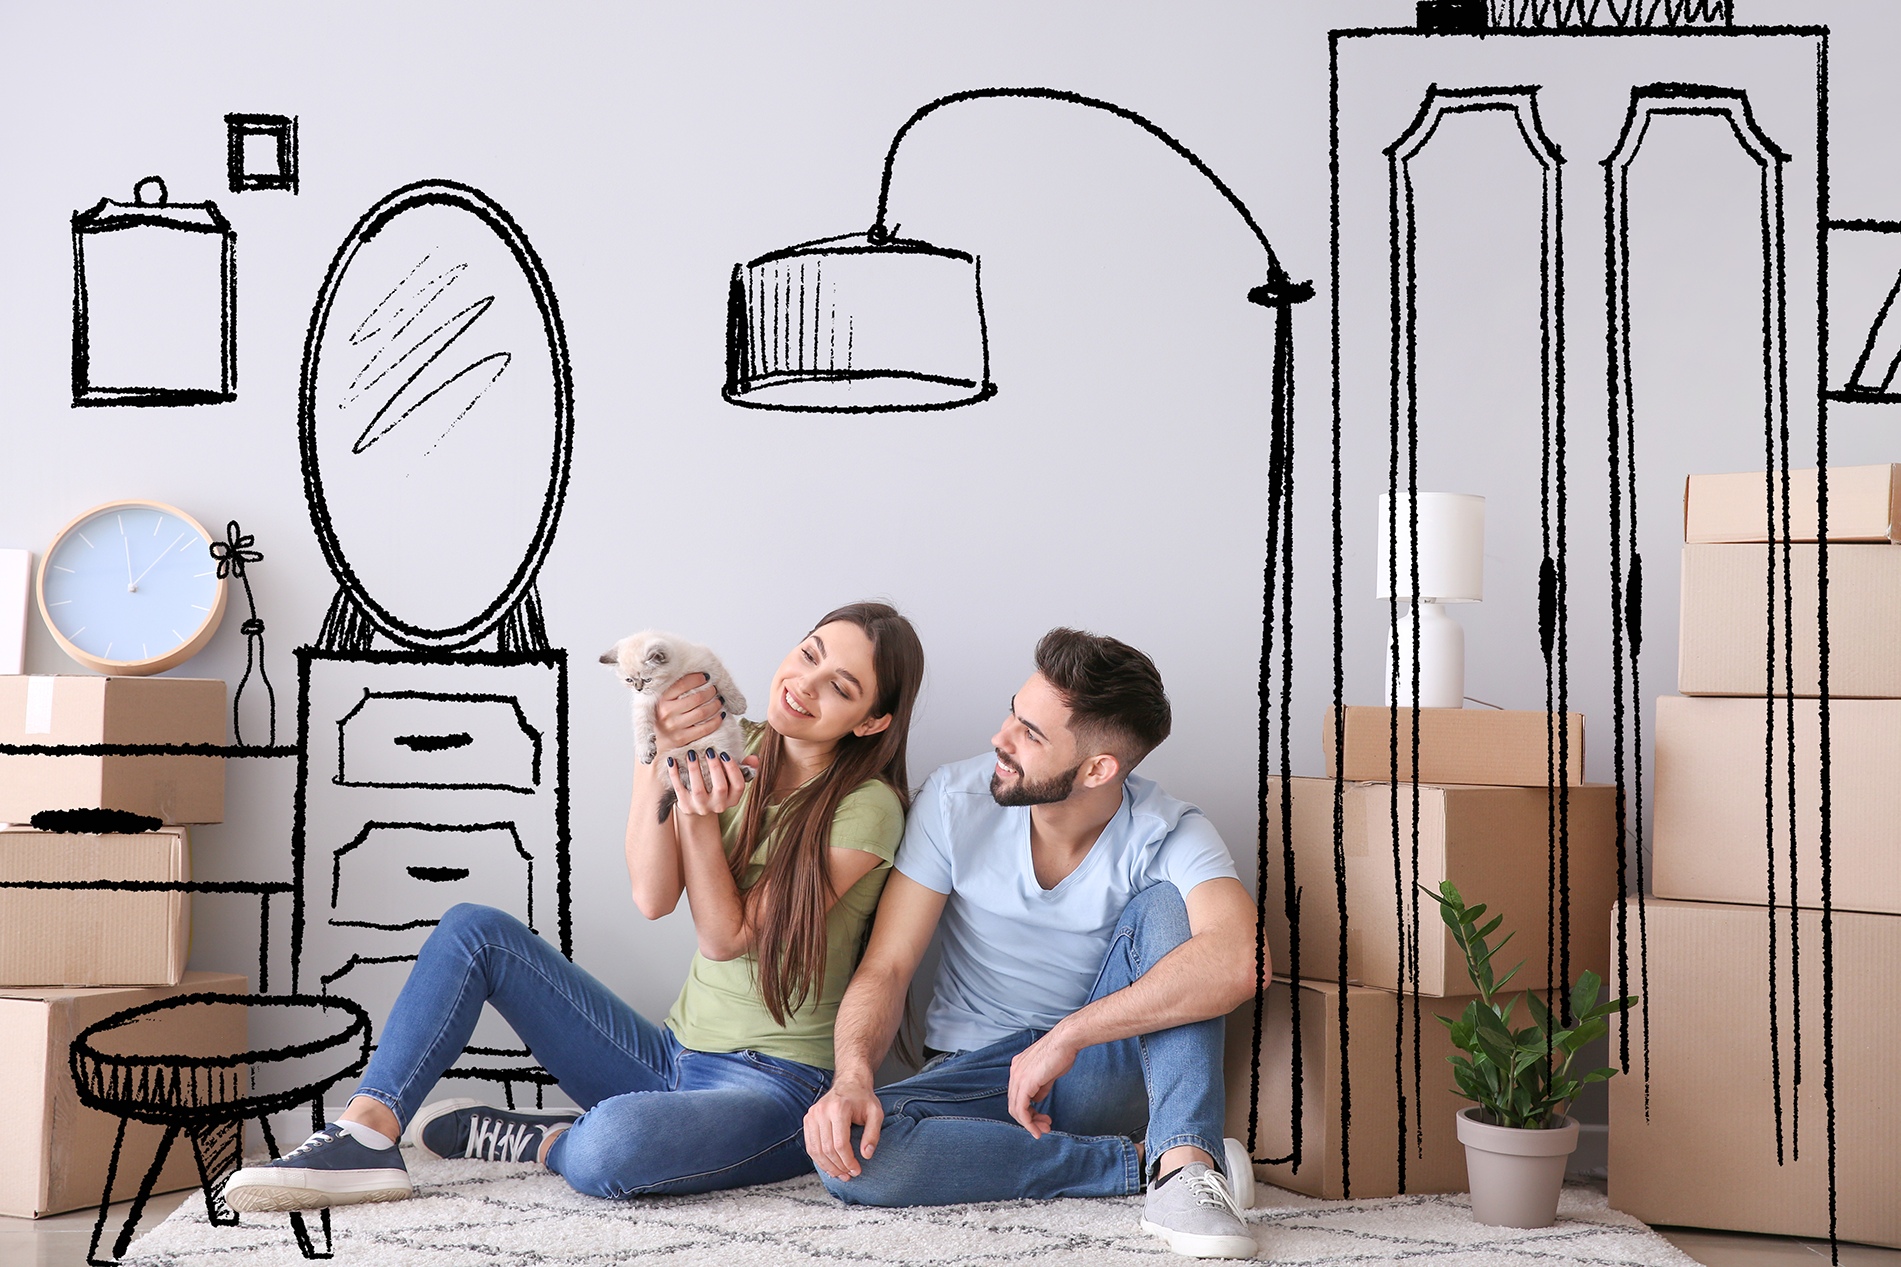 Couple enjoying new house with drawn furniture behind them